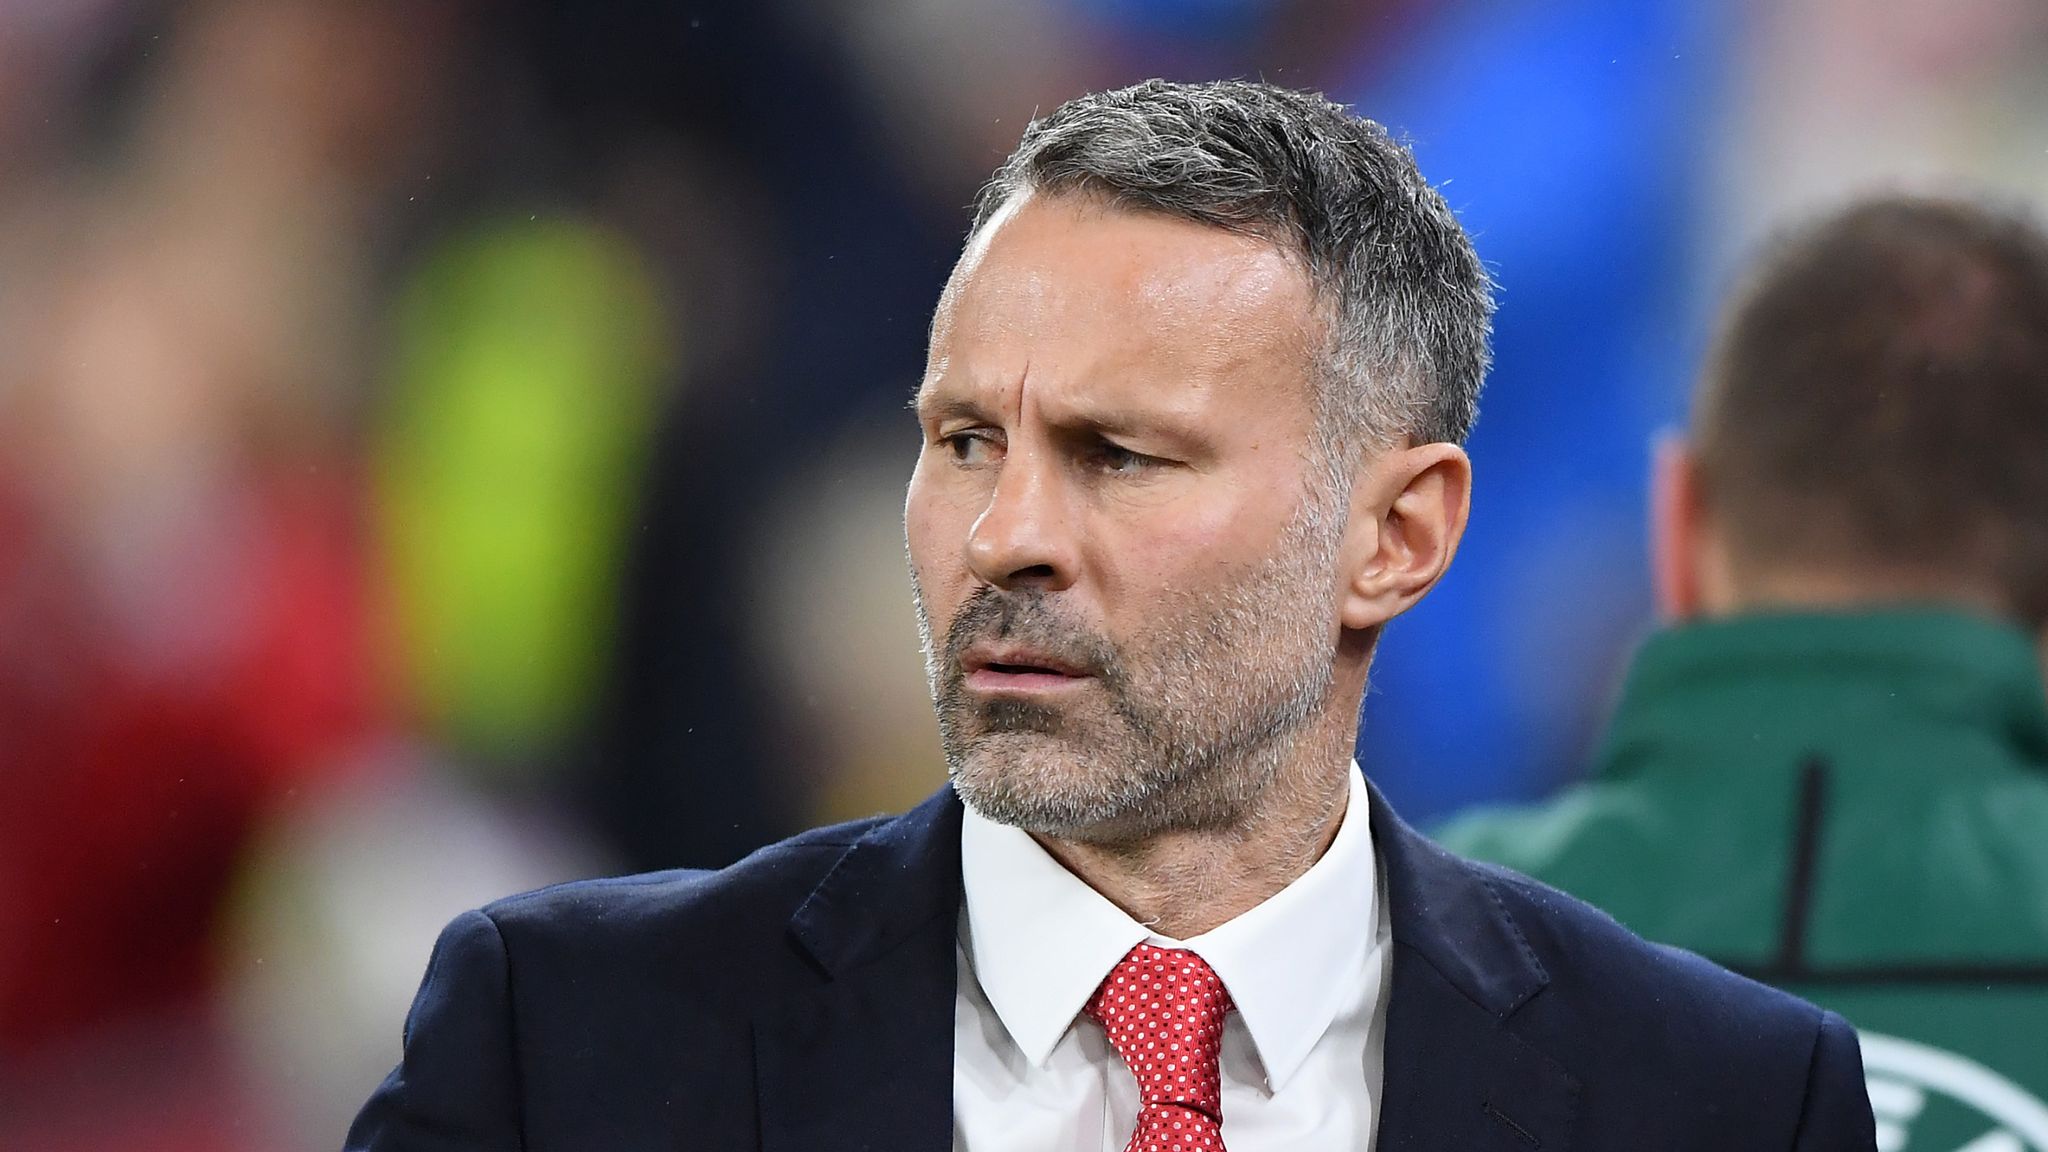 Ryan Giggs Co Operating With Police After Assault Arrest And Denies Allegations Against Him Uk News Sky News